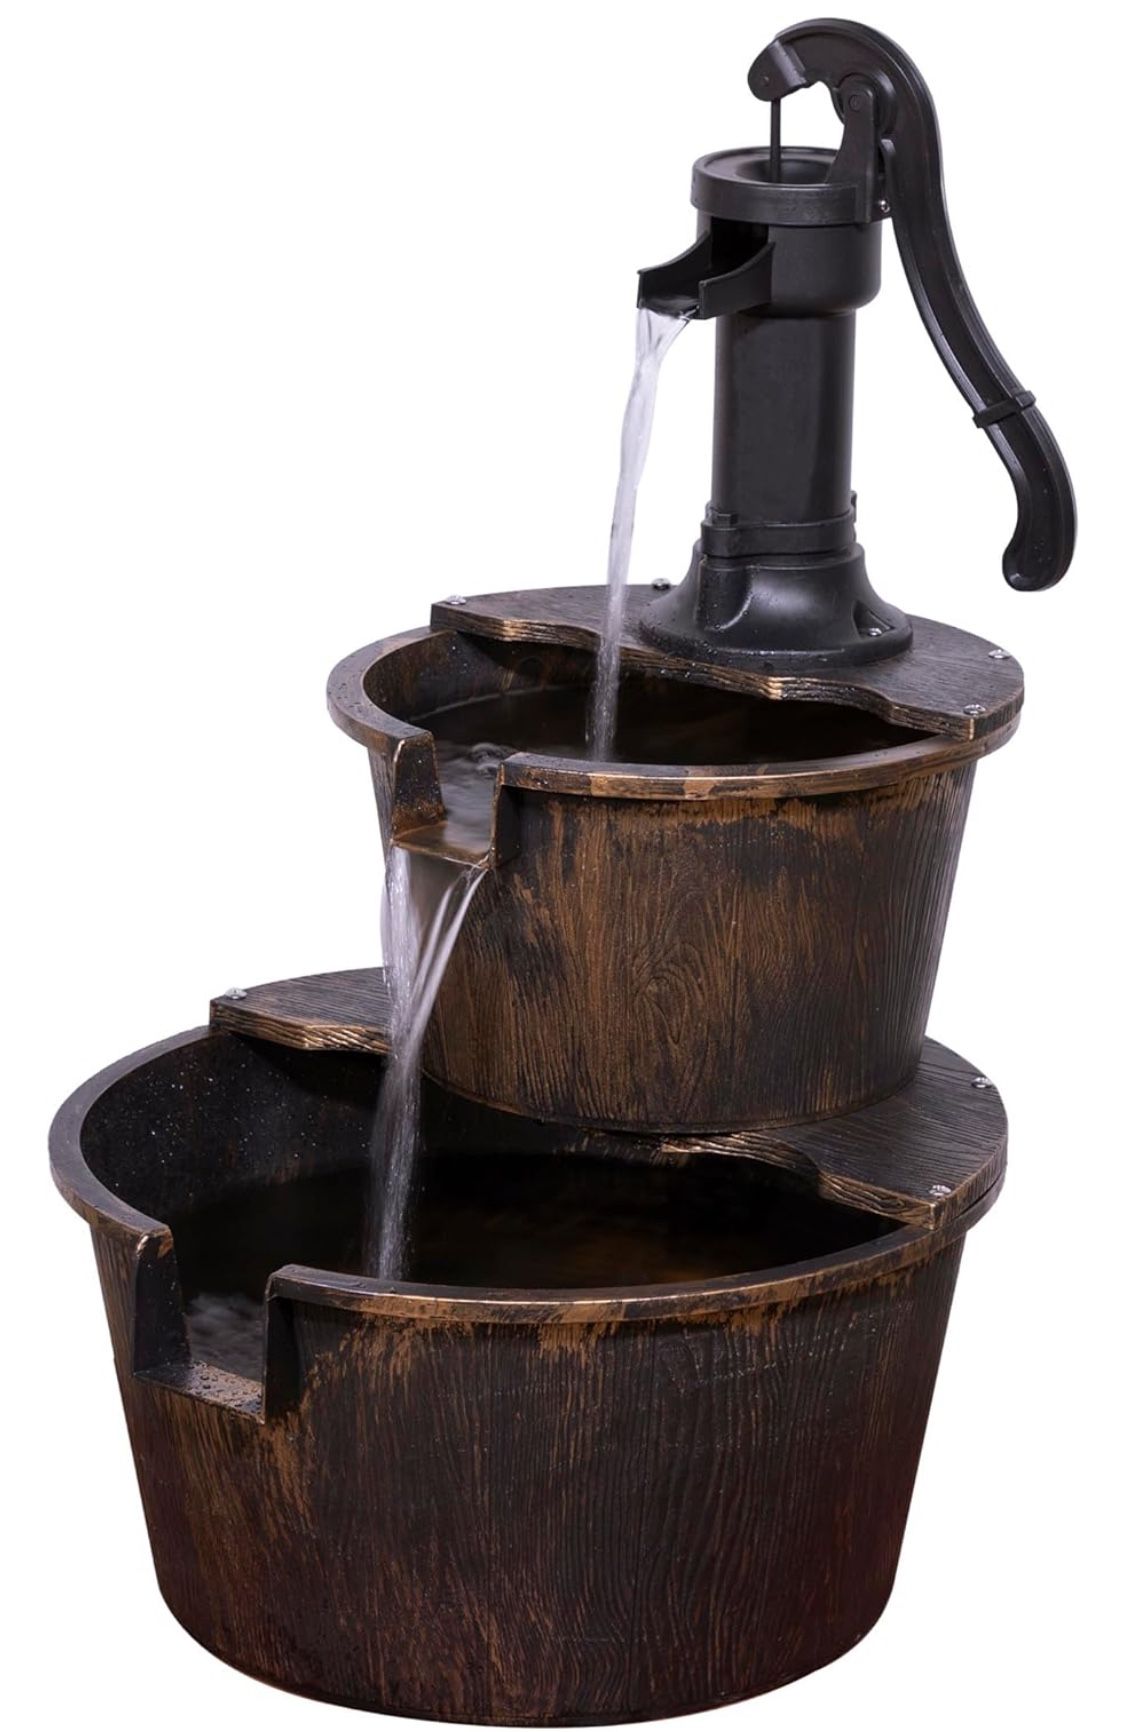 2-Tiered Barrel and Pump Water Fountain, Old-Fashioned Fountain, 27", Bronze, Outdoor Floor Rustic